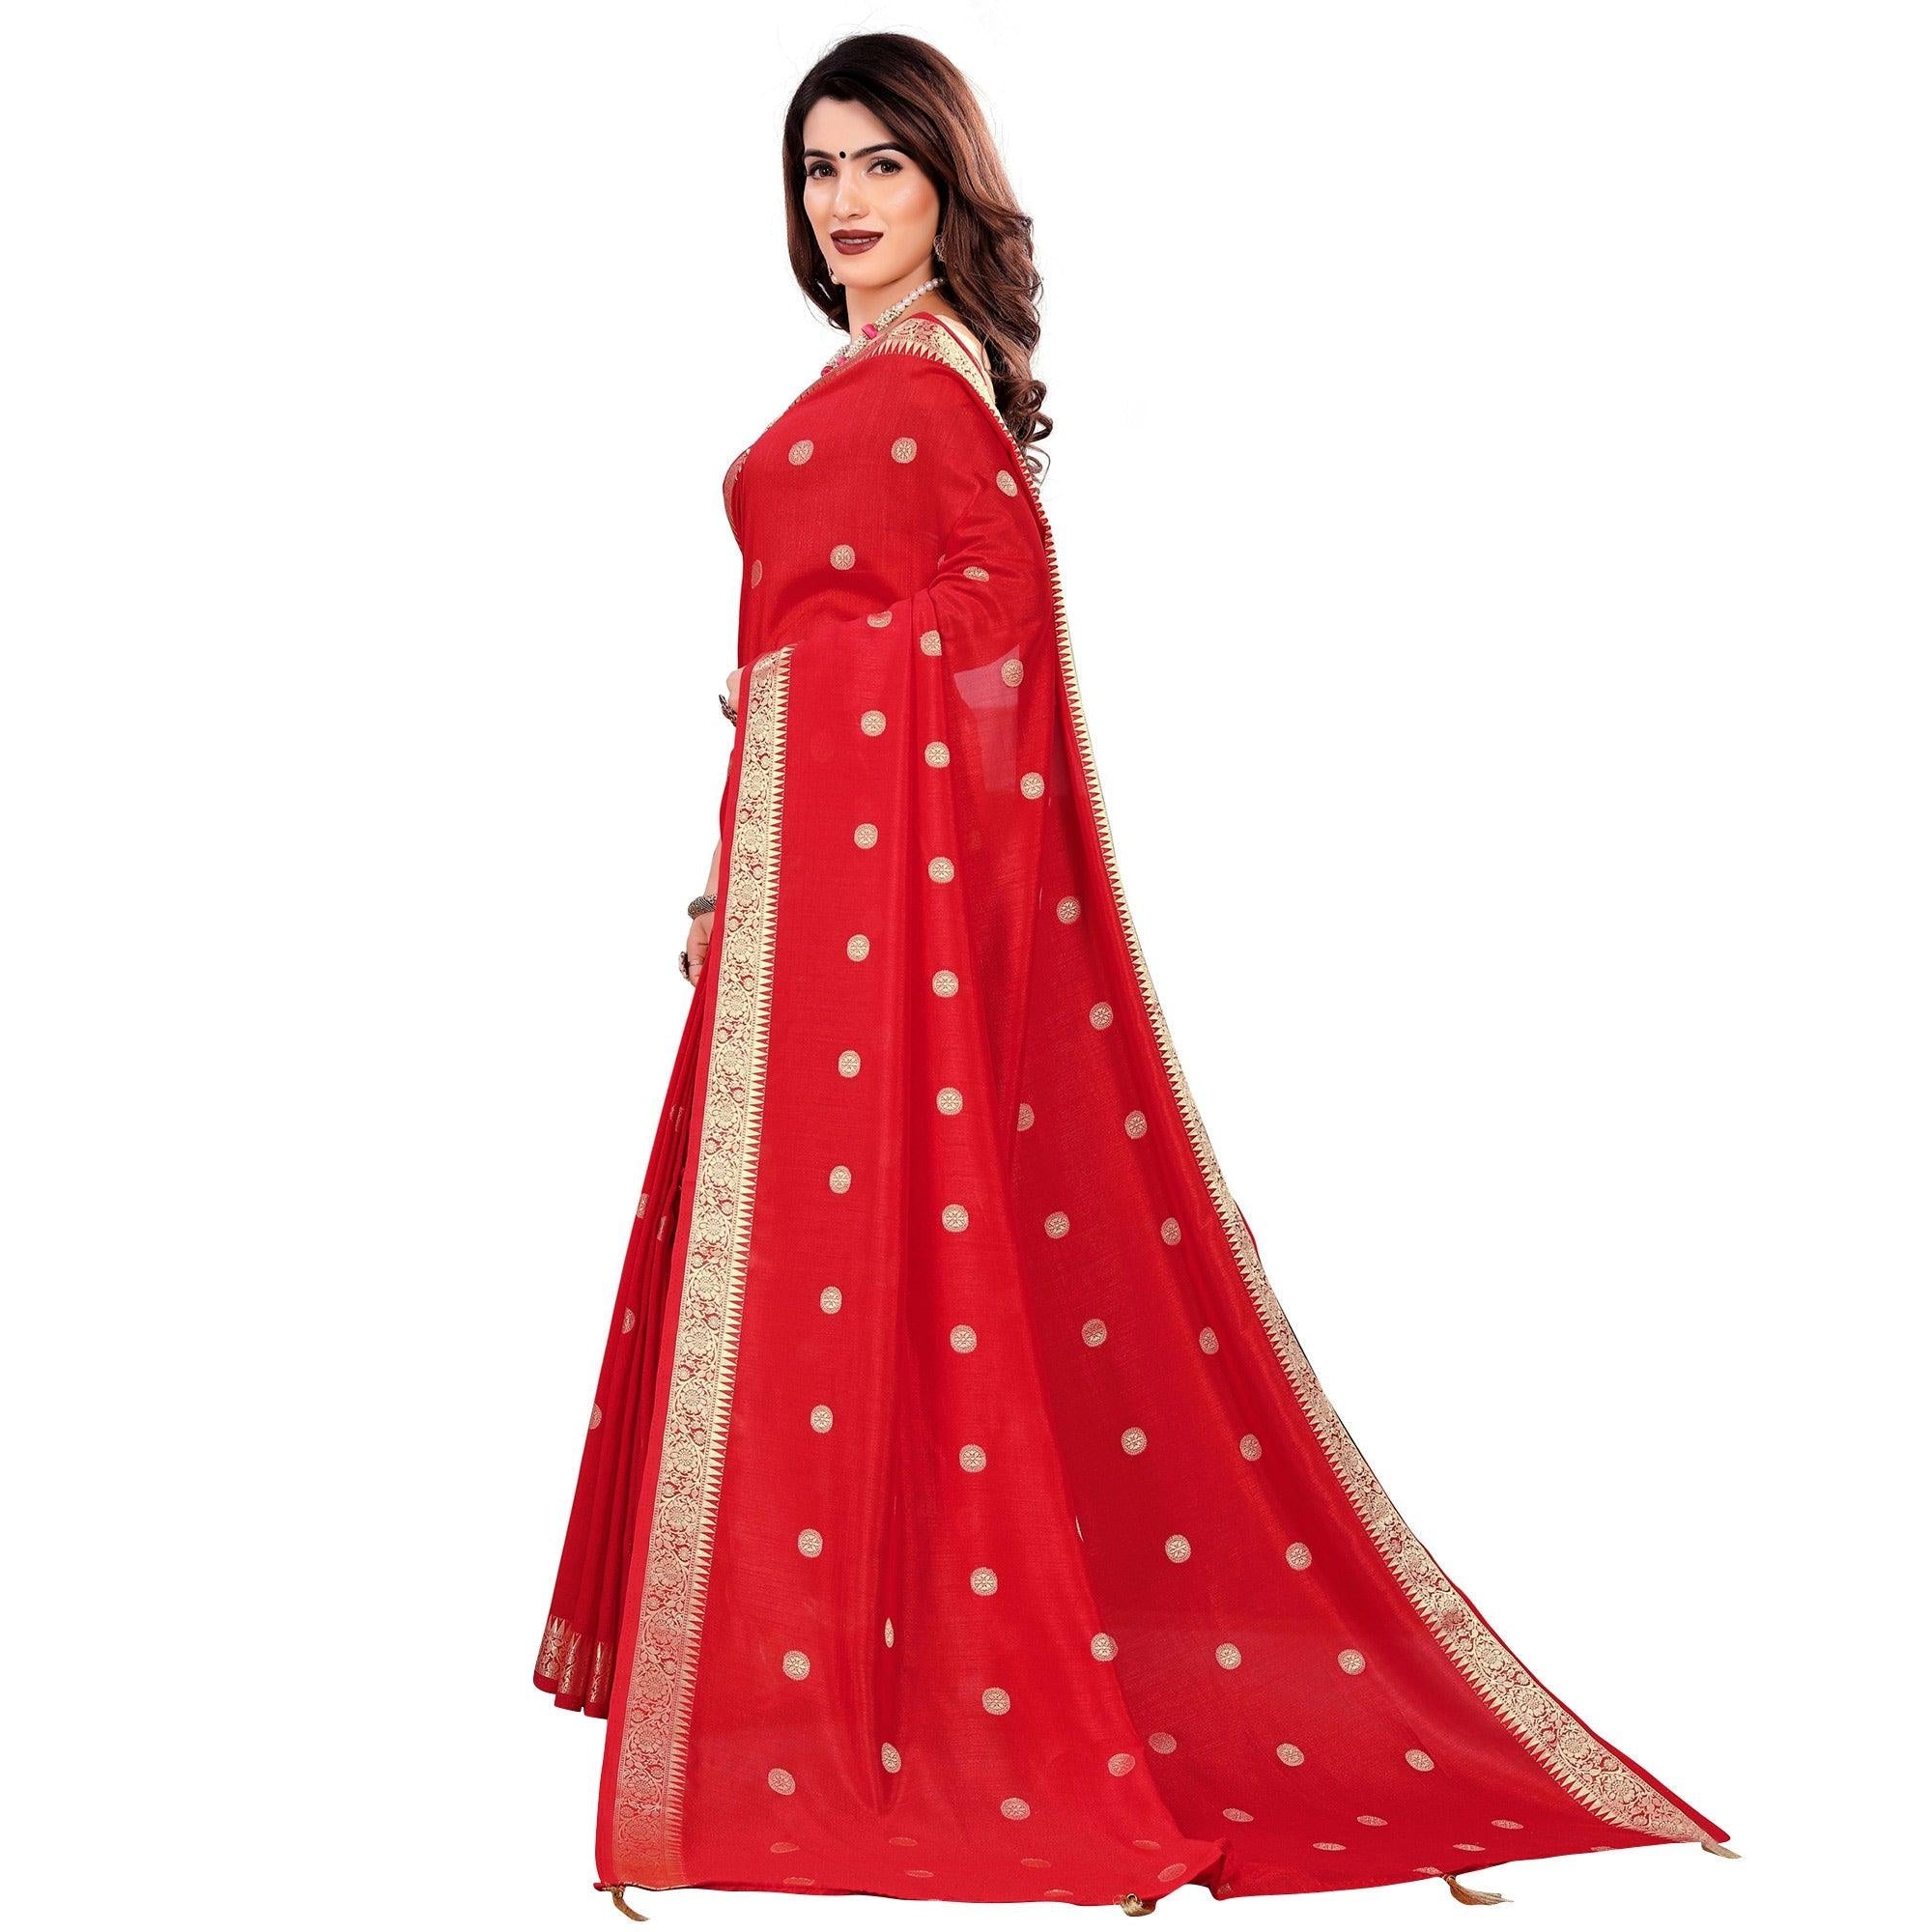 Blooming Red Colored Casual Wear Embroidered Art Silk Saree With Tassels - Peachmode